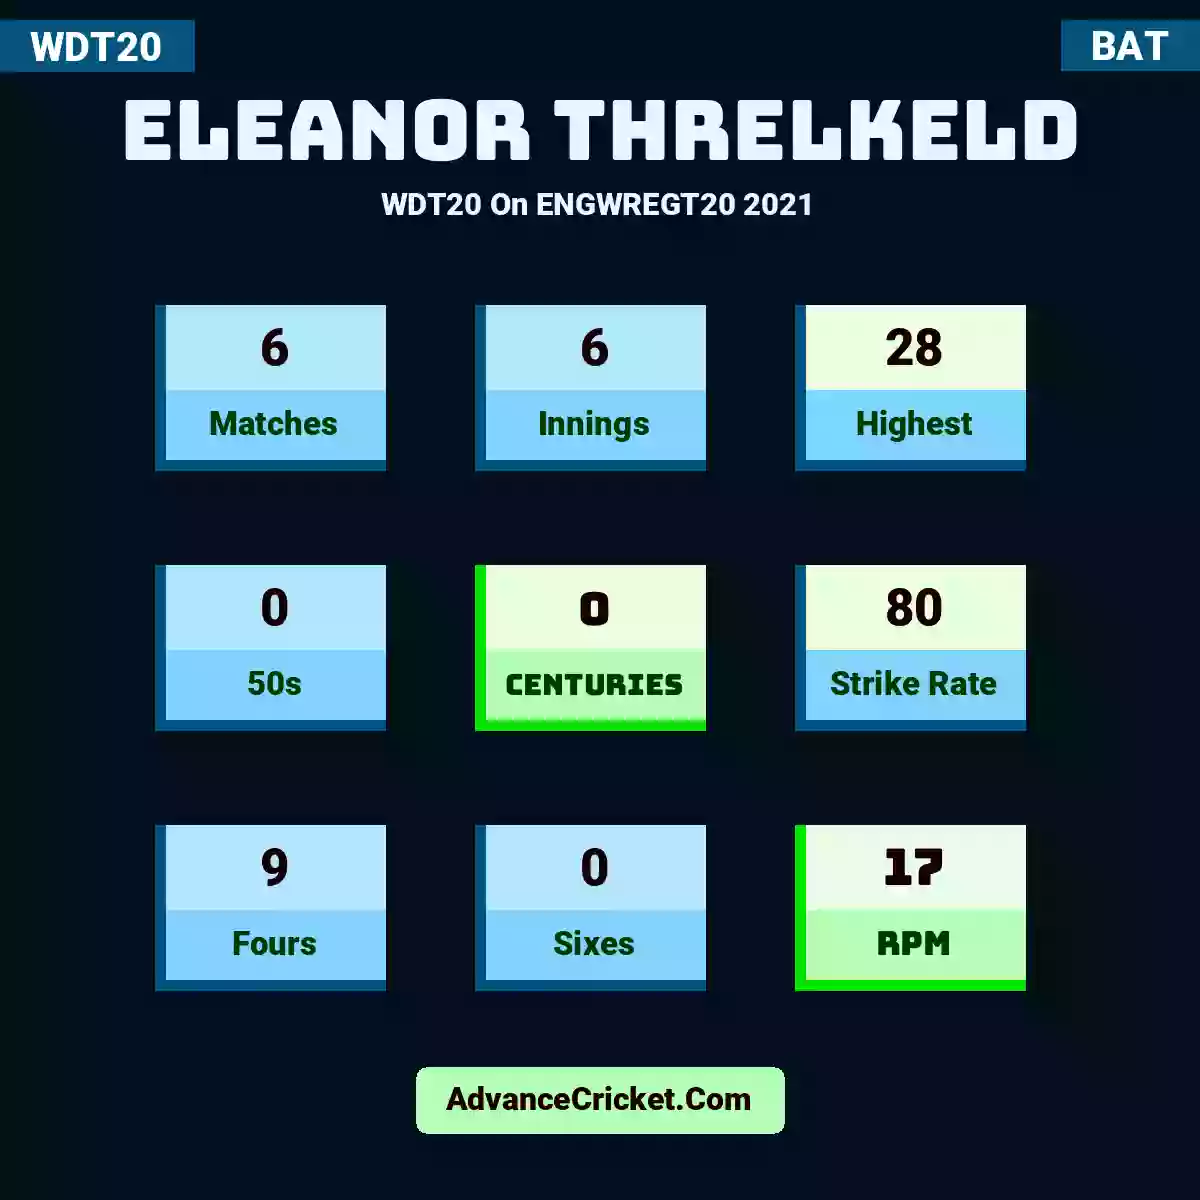 Eleanor Threlkeld WDT20  On ENGWREGT20 2021, Eleanor Threlkeld played 6 matches, scored 28 runs as highest, 0 half-centuries, and 0 centuries, with a strike rate of 80. E.Threlkeld hit 9 fours and 0 sixes, with an RPM of 17.